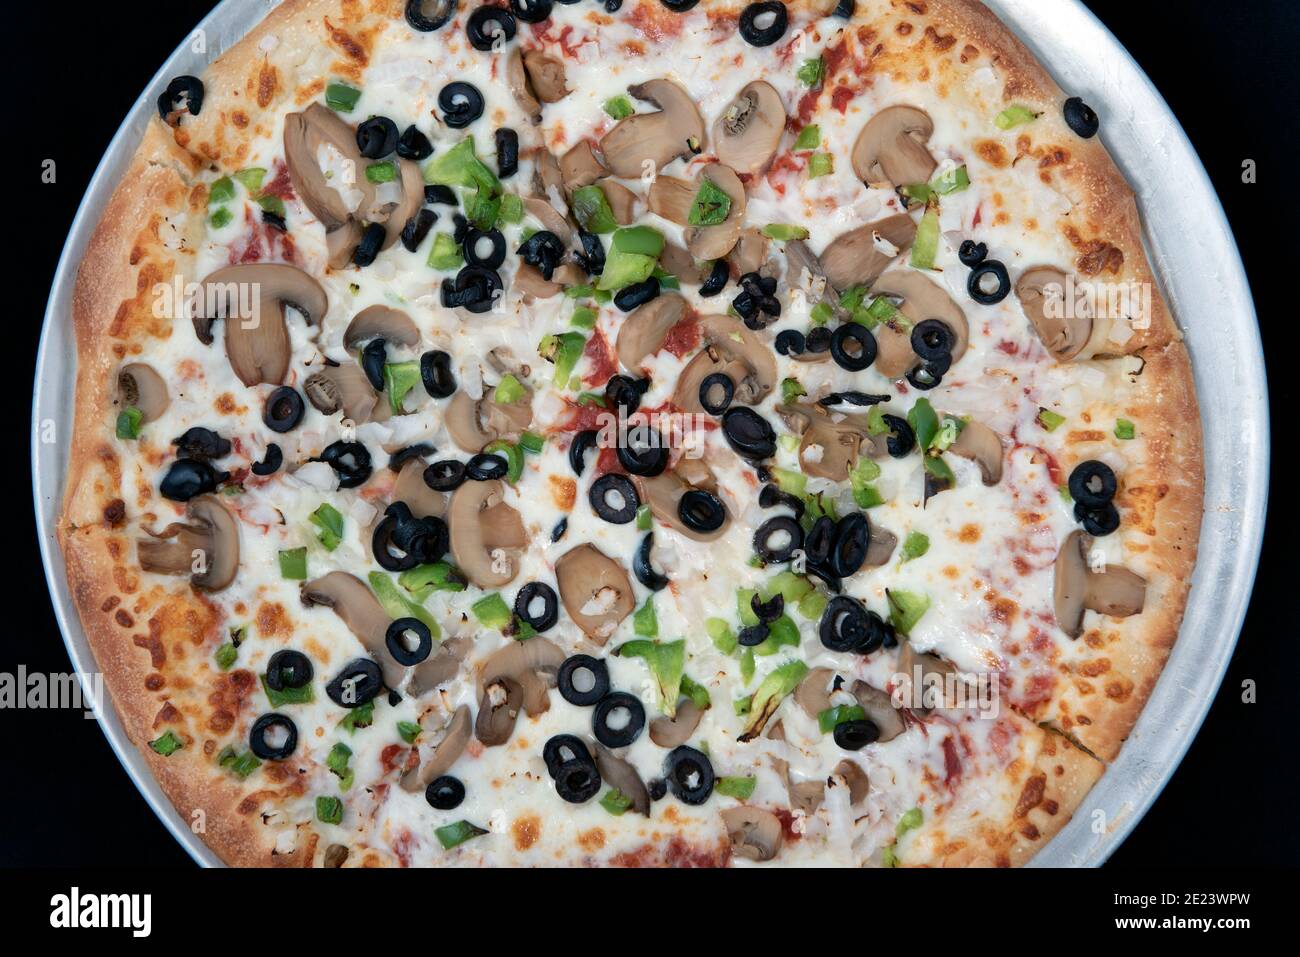 Overhead view of veggie vegetable covered pizza with melted cheese tempting for those avoiding meat. Stock Photo